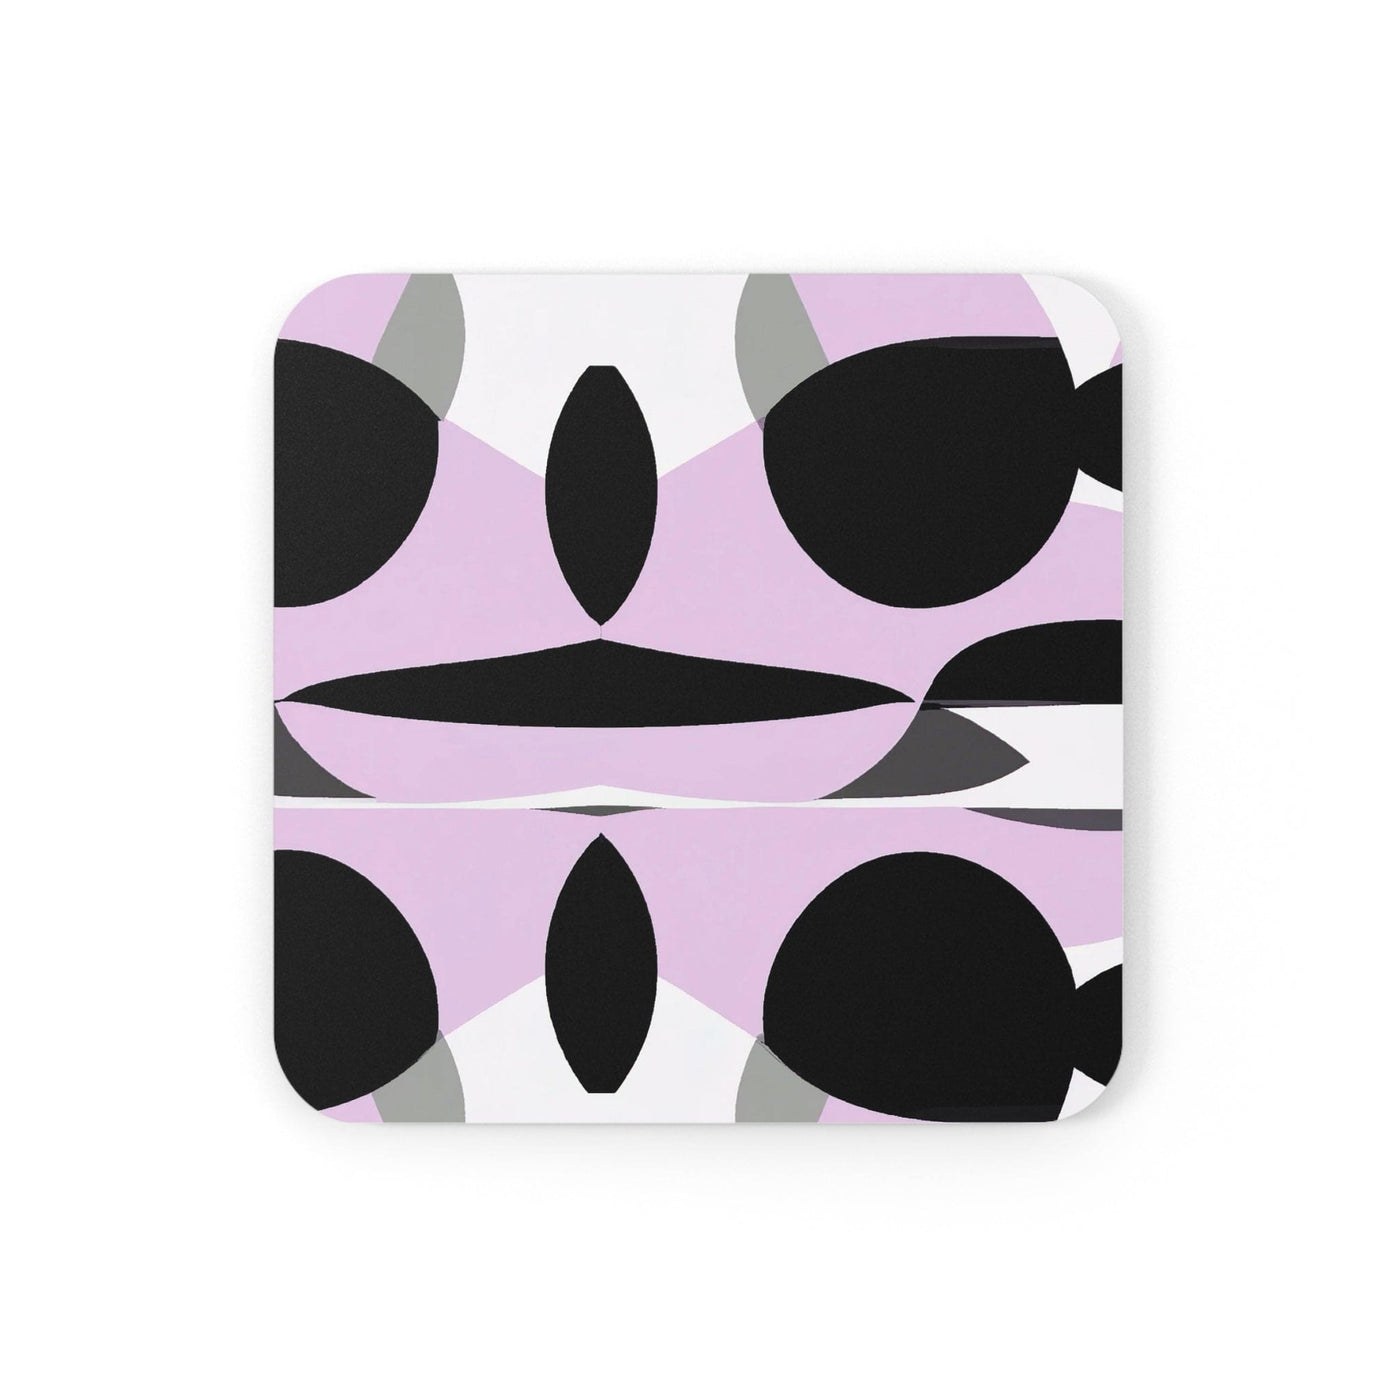 Coaster Set Of 4 For Drinks Geometric Lavender And Black Pattern - Decorative